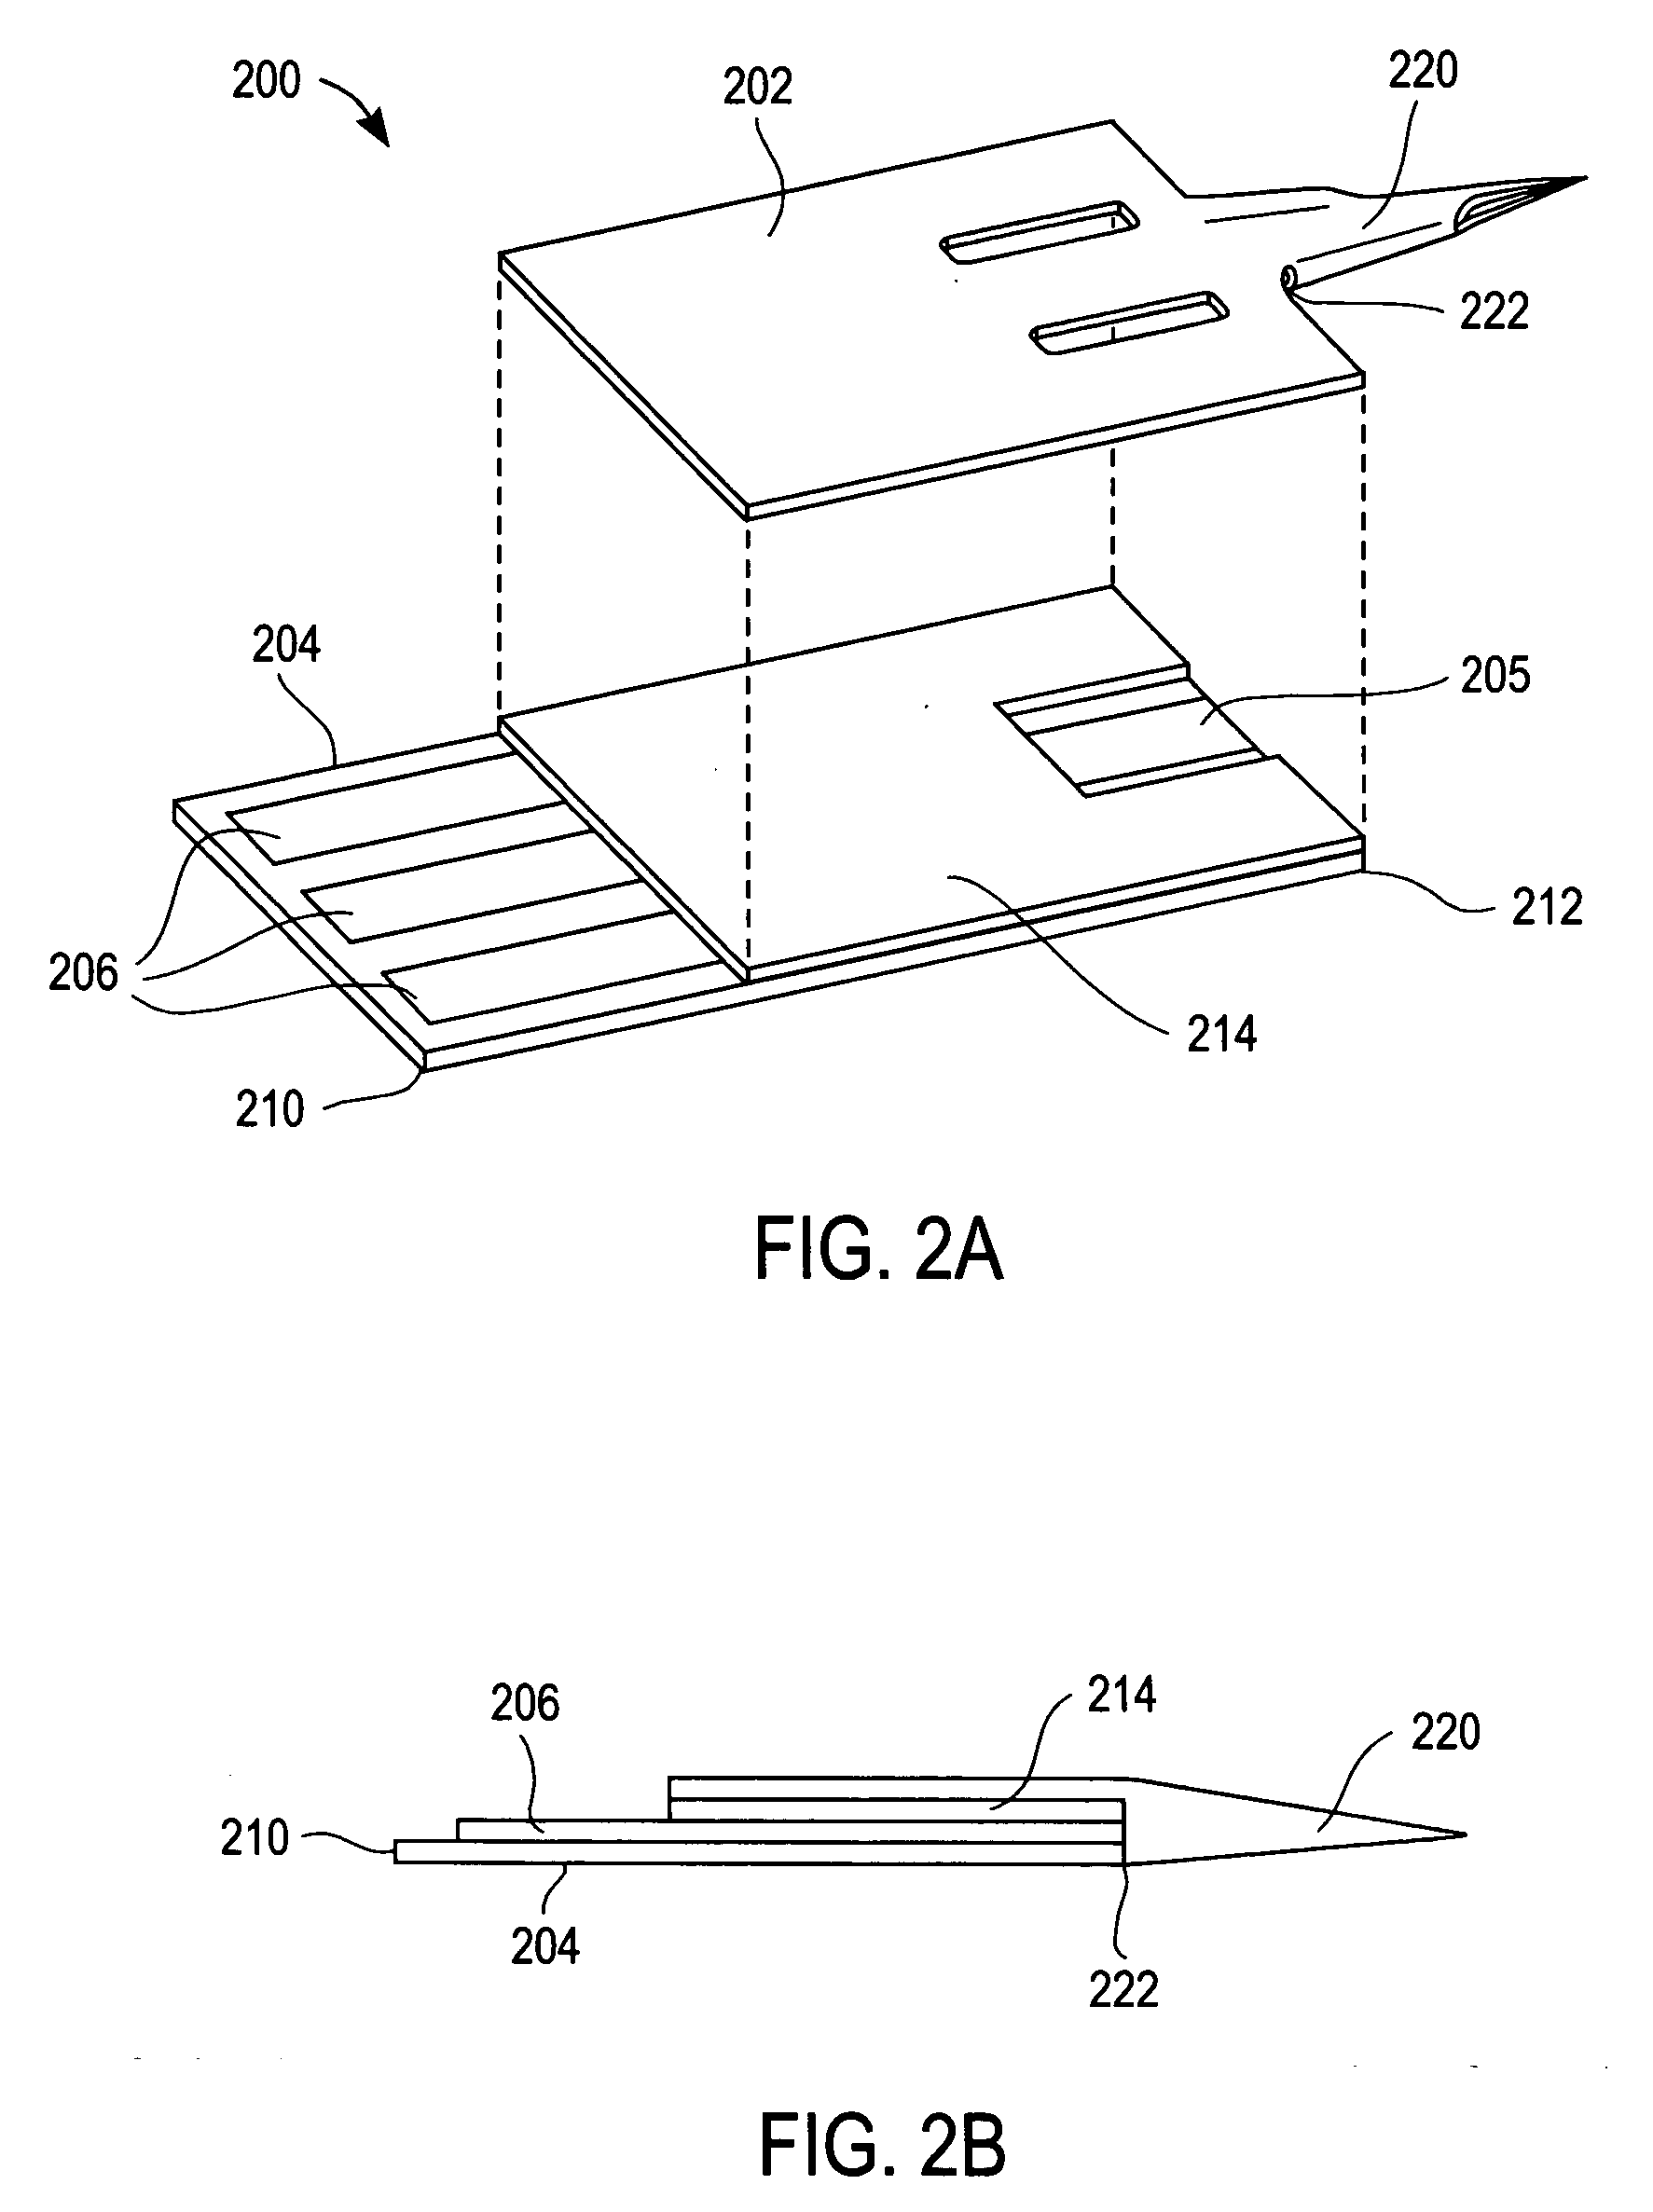 Apparatus for the manufacture of medical devices